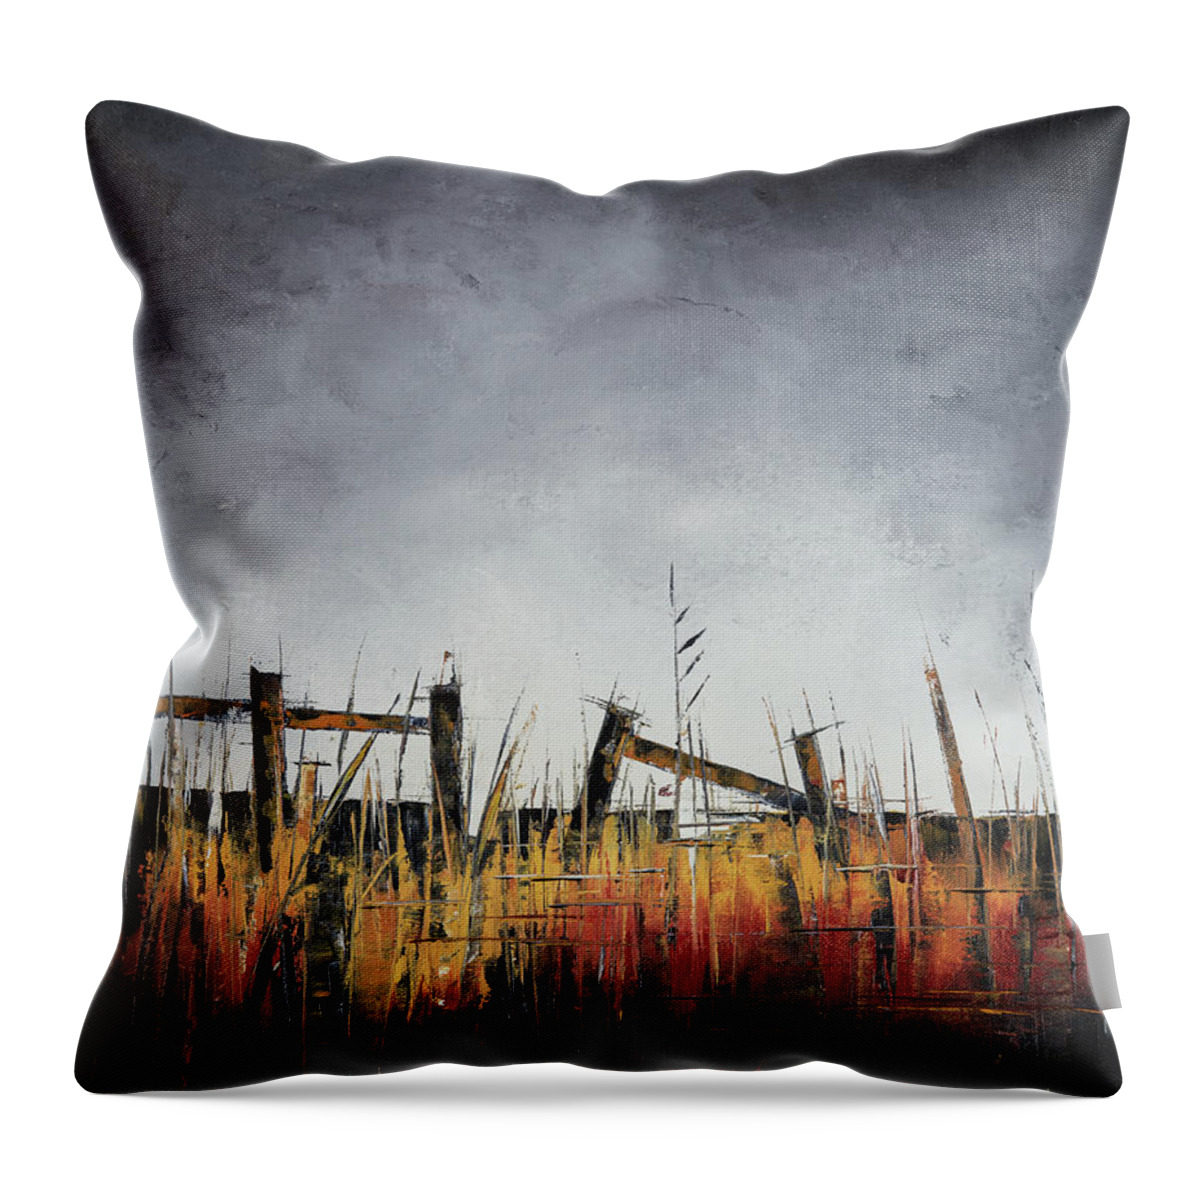 Fields Throw Pillow featuring the painting The Stories Were Left Untold by Carolyn Doe